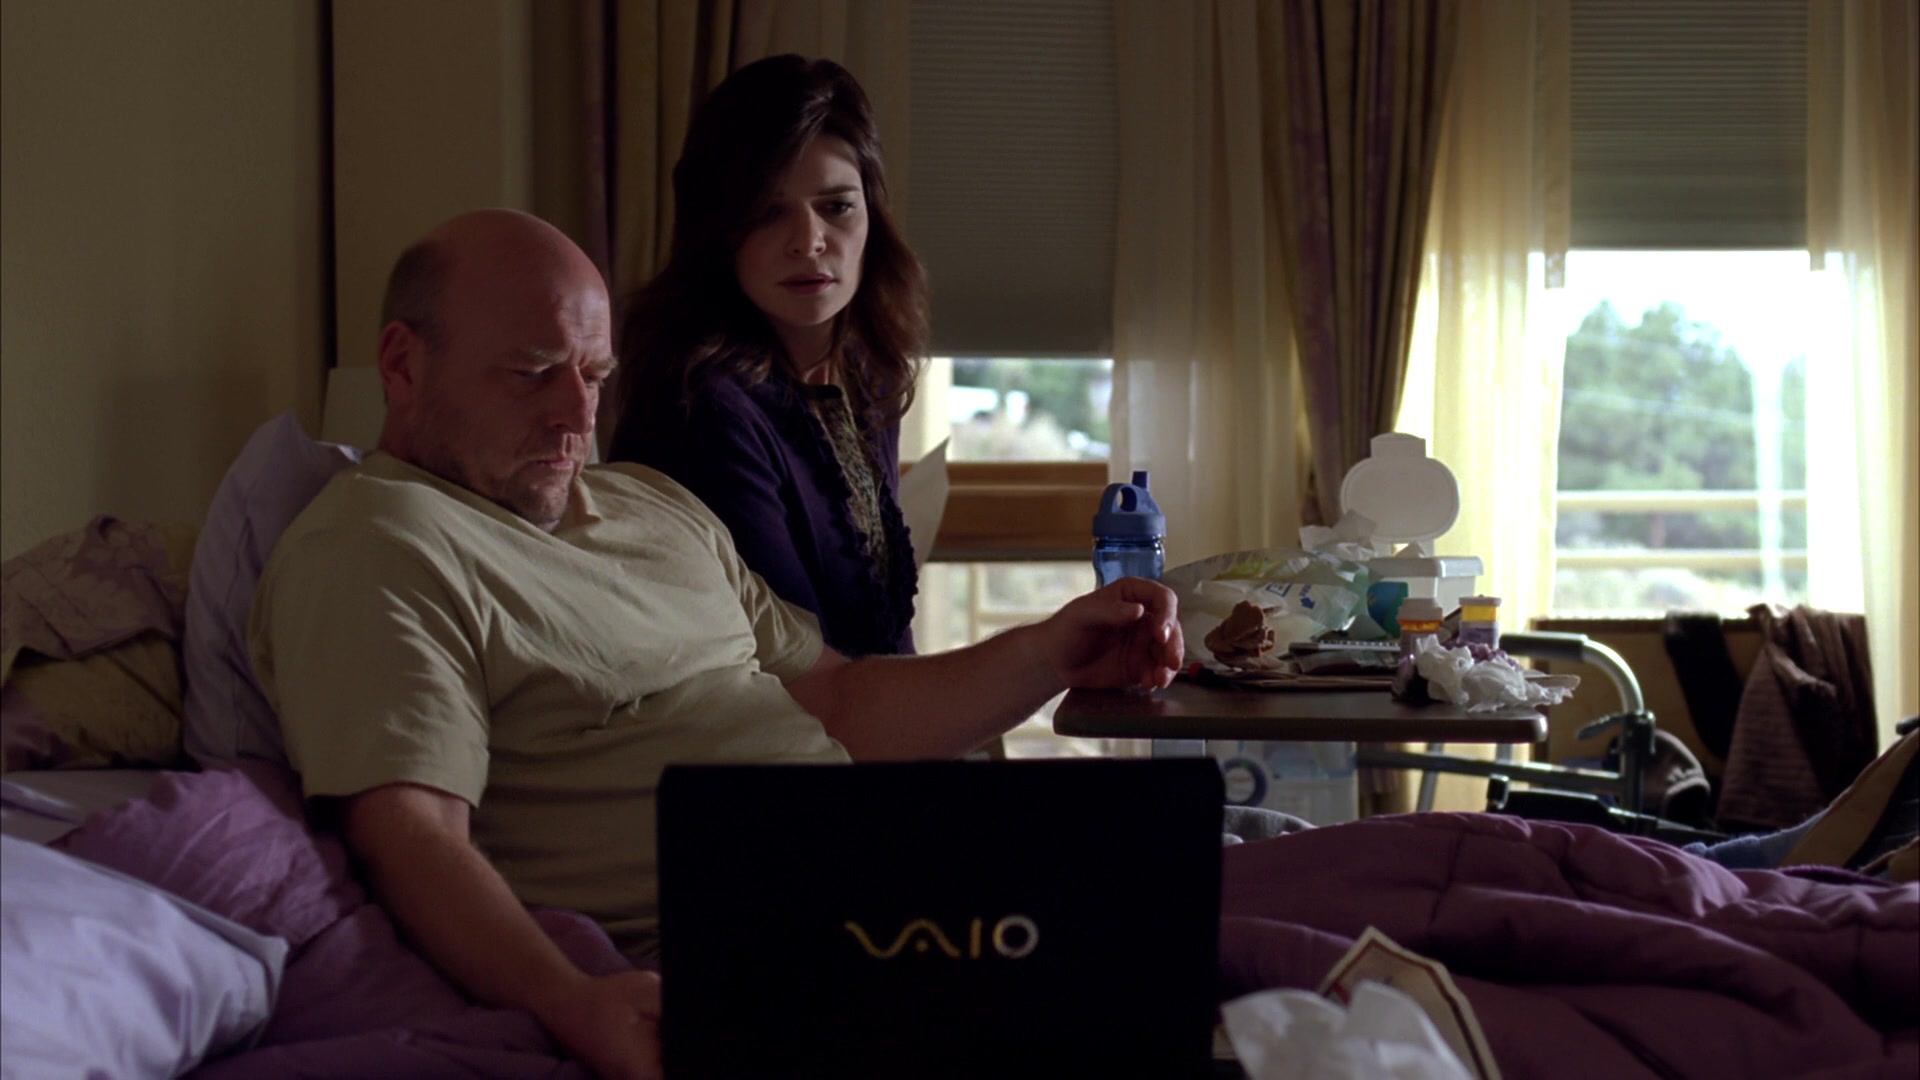 Sony Vaio Notebook Used By Dean Norris Hank Schrader In Breaking Images, Photos, Reviews